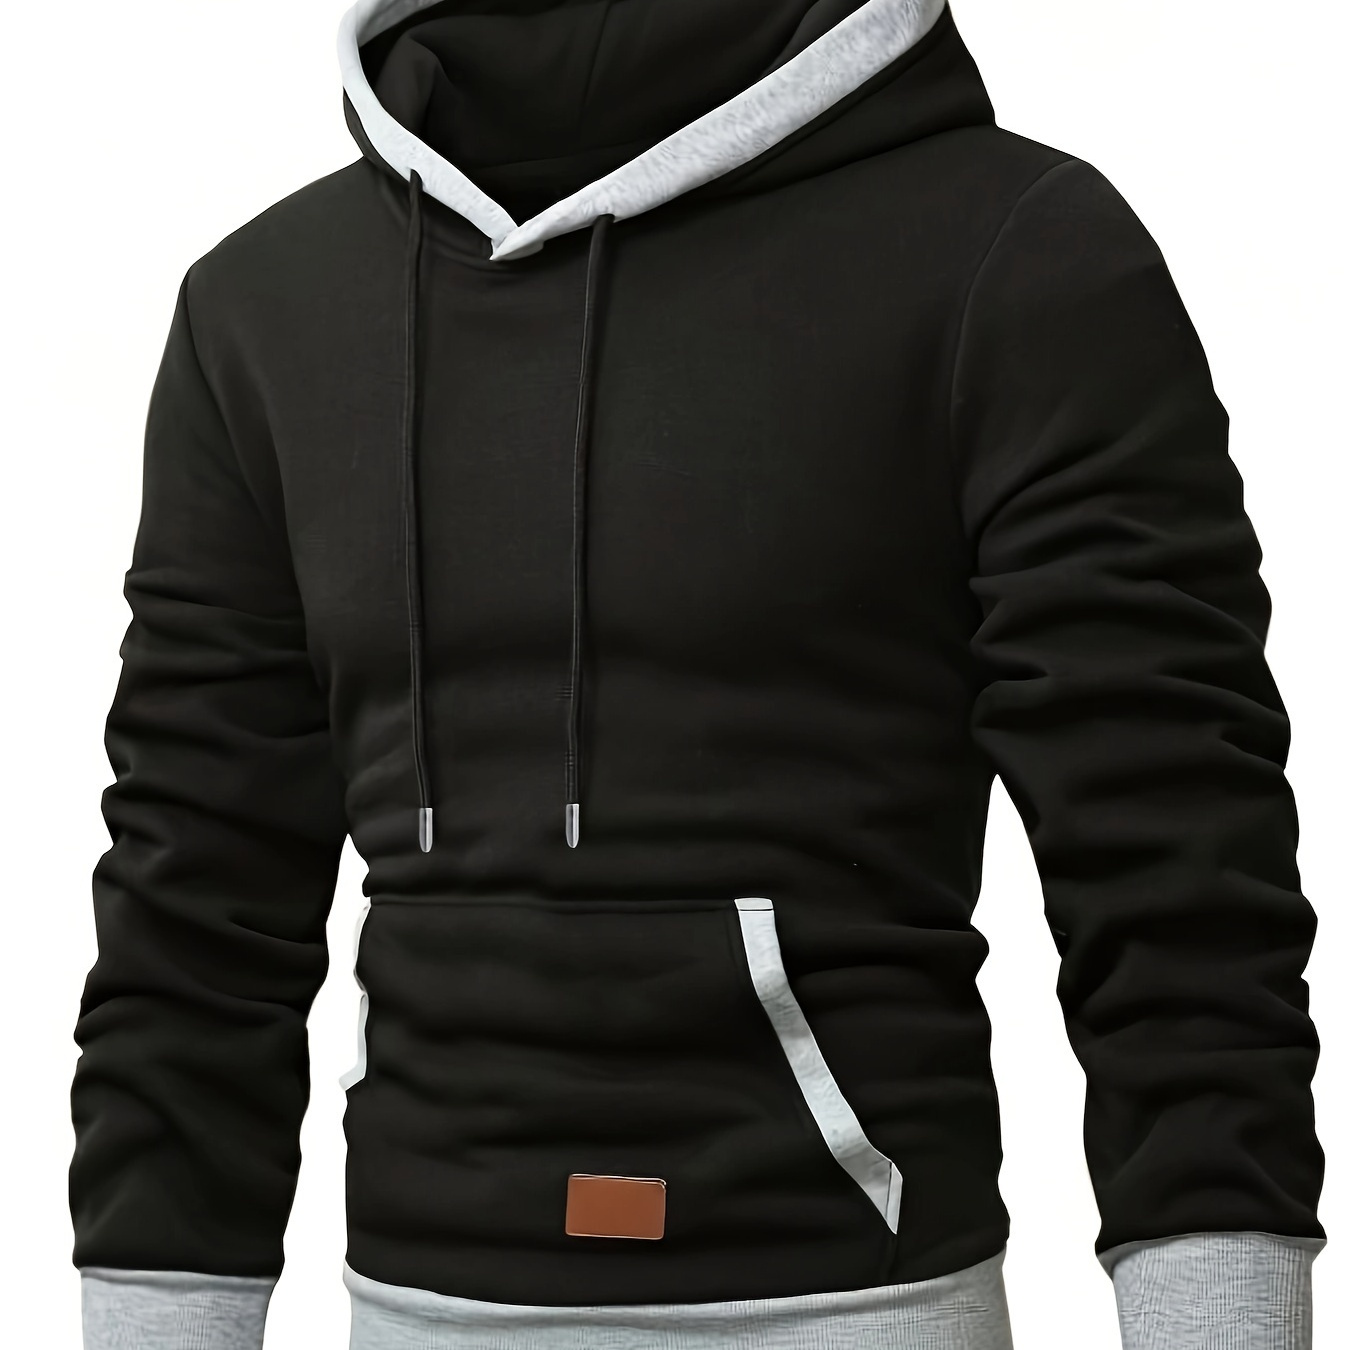 

Men's Contrast Color Hooded Long Sleeve Sweatshirt With A Kangaroo Pocket And Label Patchwork, Casual And Trendy Hoodie For Outdoors And Daily Wear